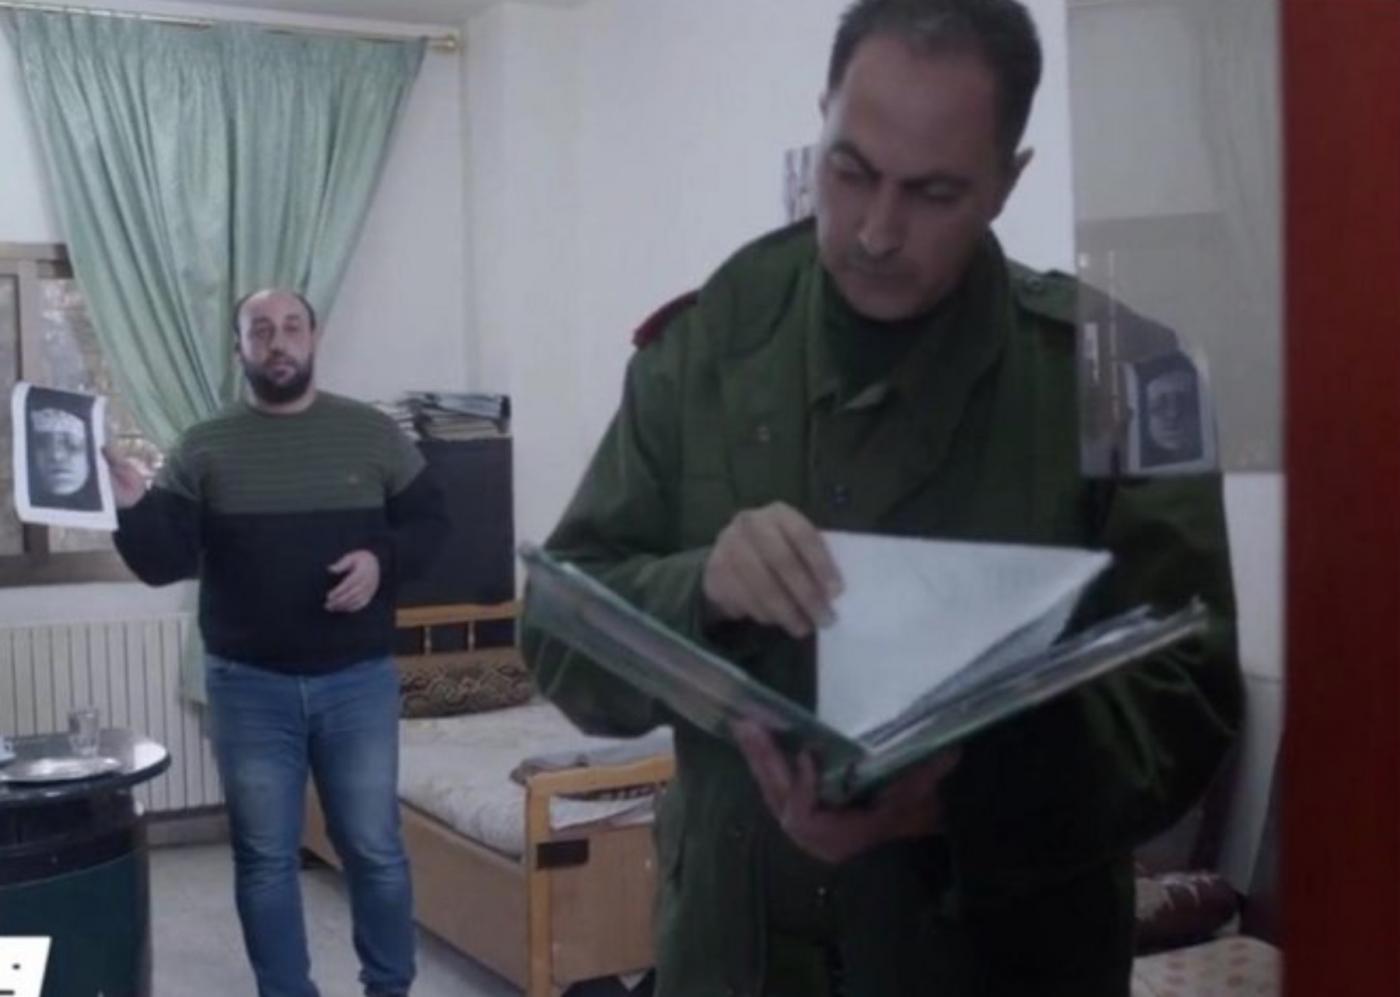 Syrian TV drama sparks anger by featuring photo of murdered activist